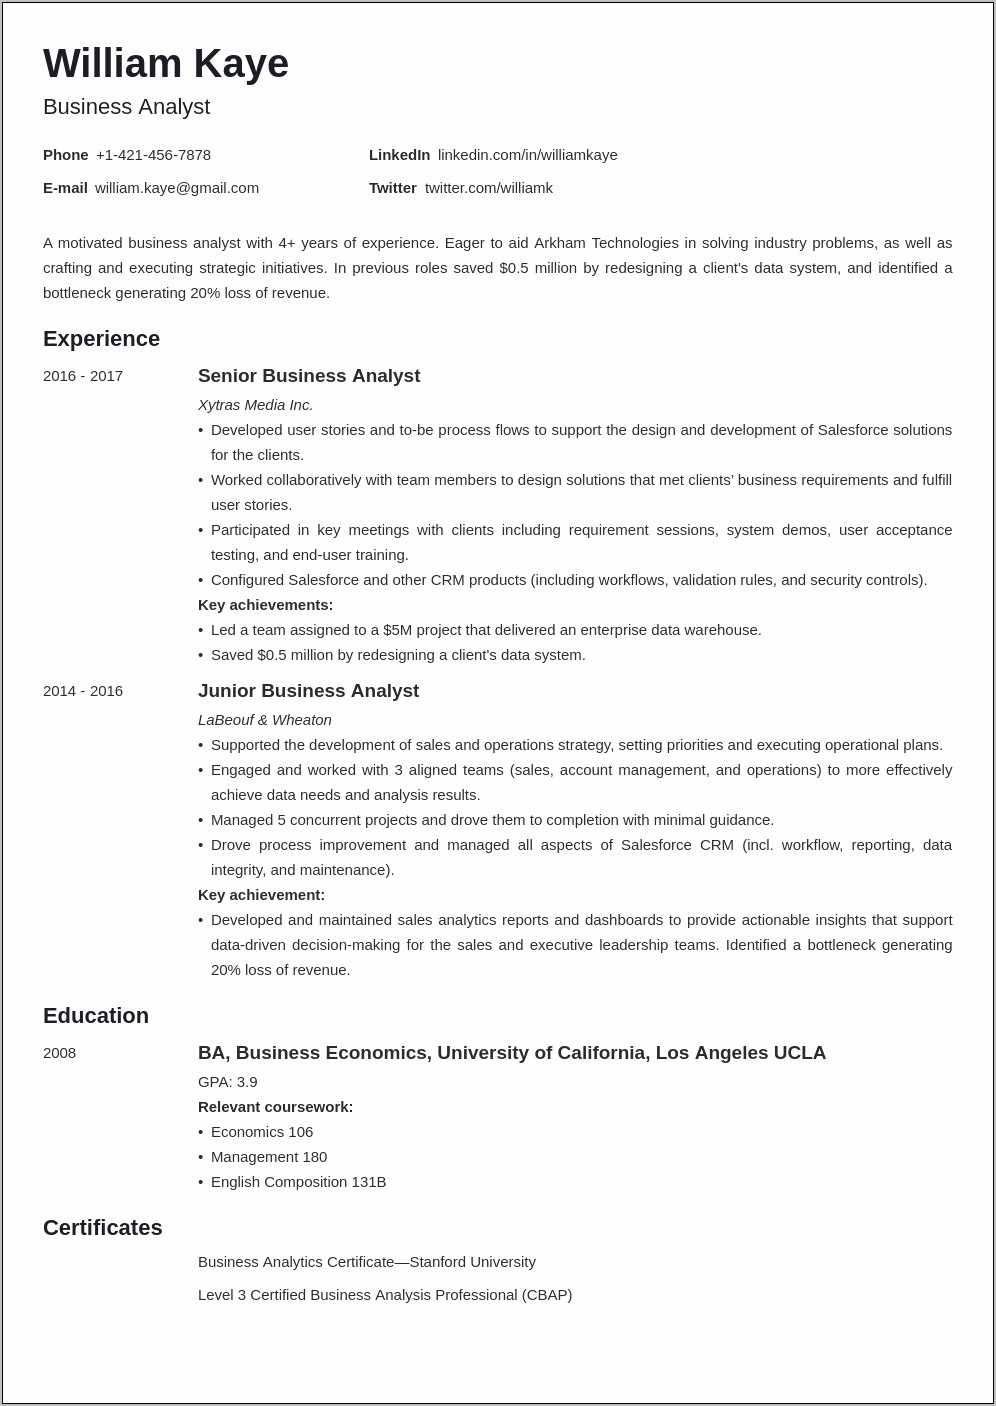 Business Analyst 8 Years Experience Resume